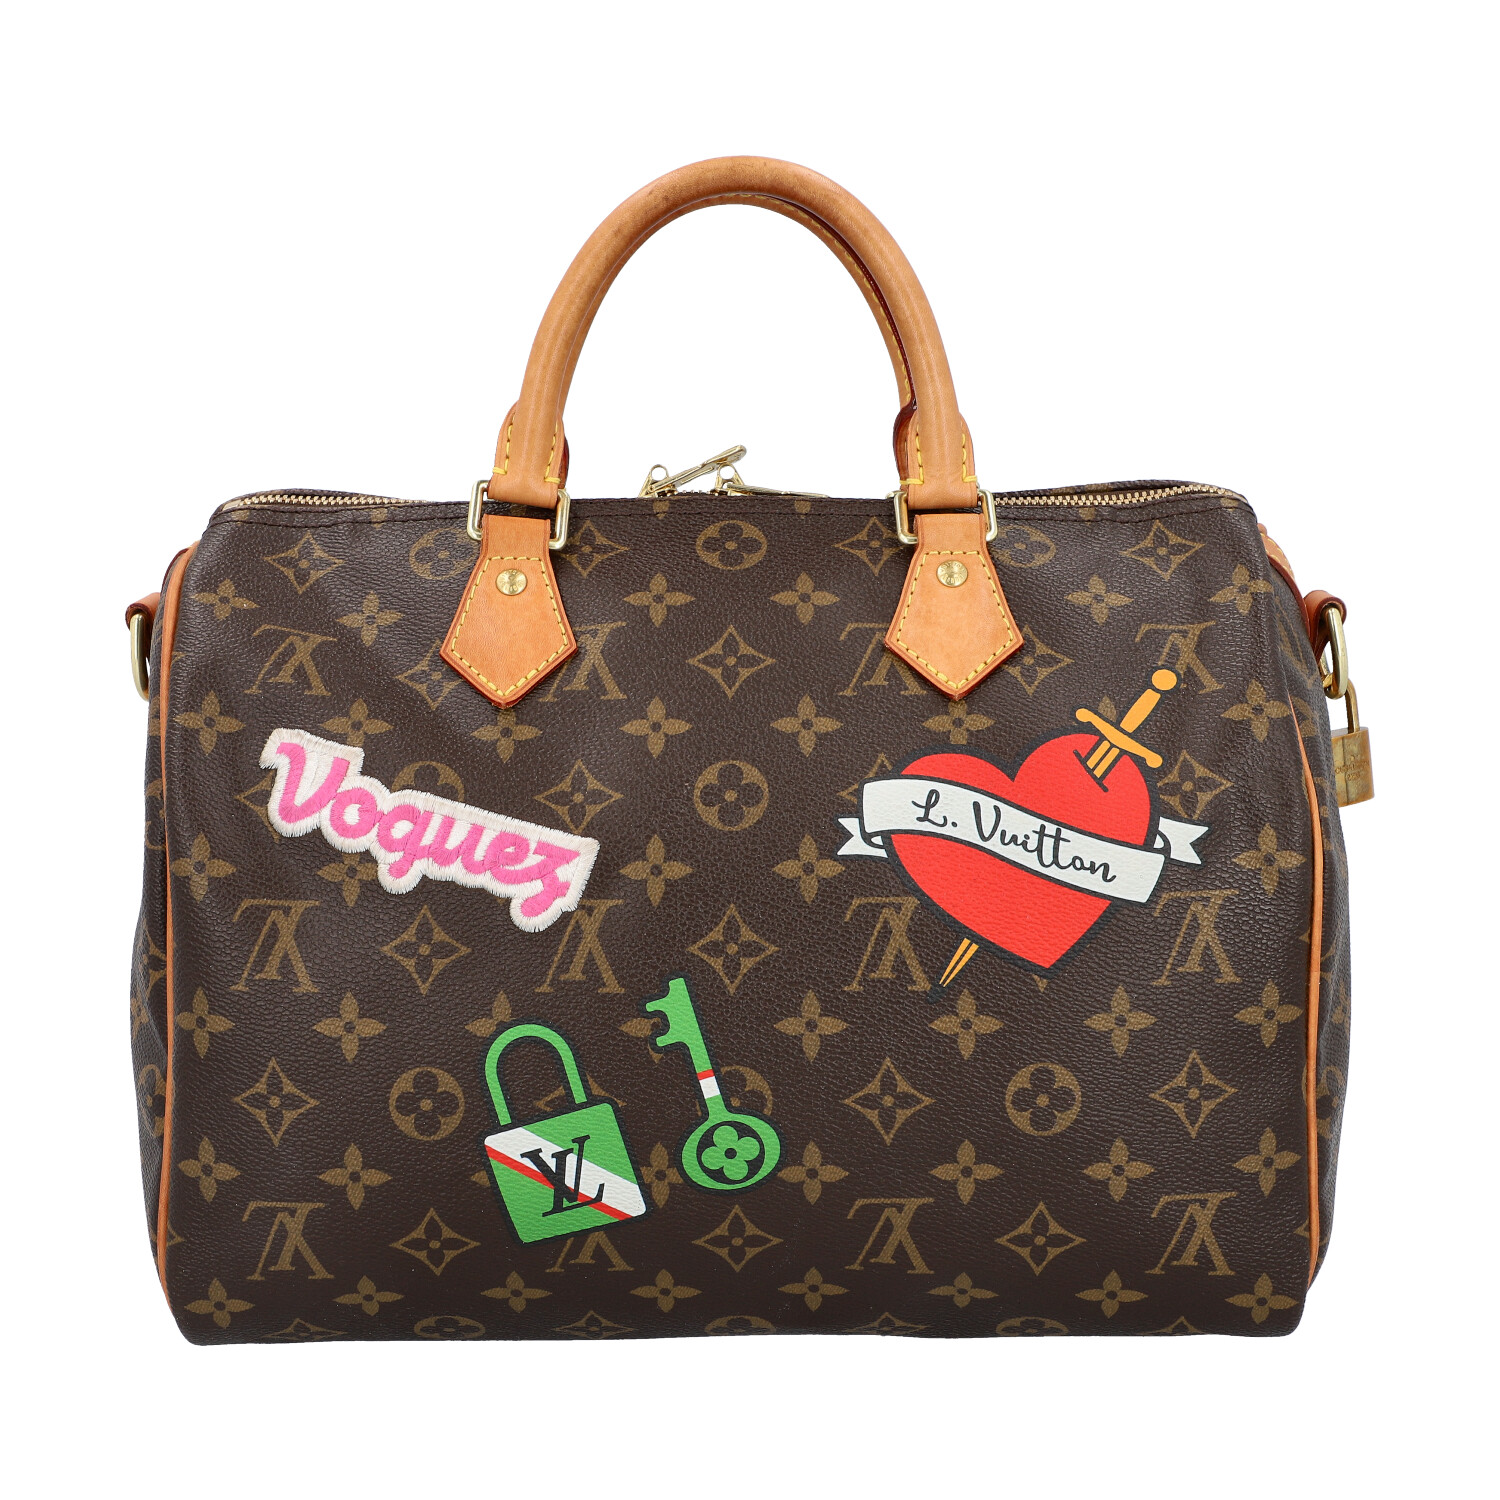 LOUIS VUITTON Handtasche "SPEEDY 30", Capsule Kollektion Hiver 2018.Limited Edition. M - Image 4 of 9